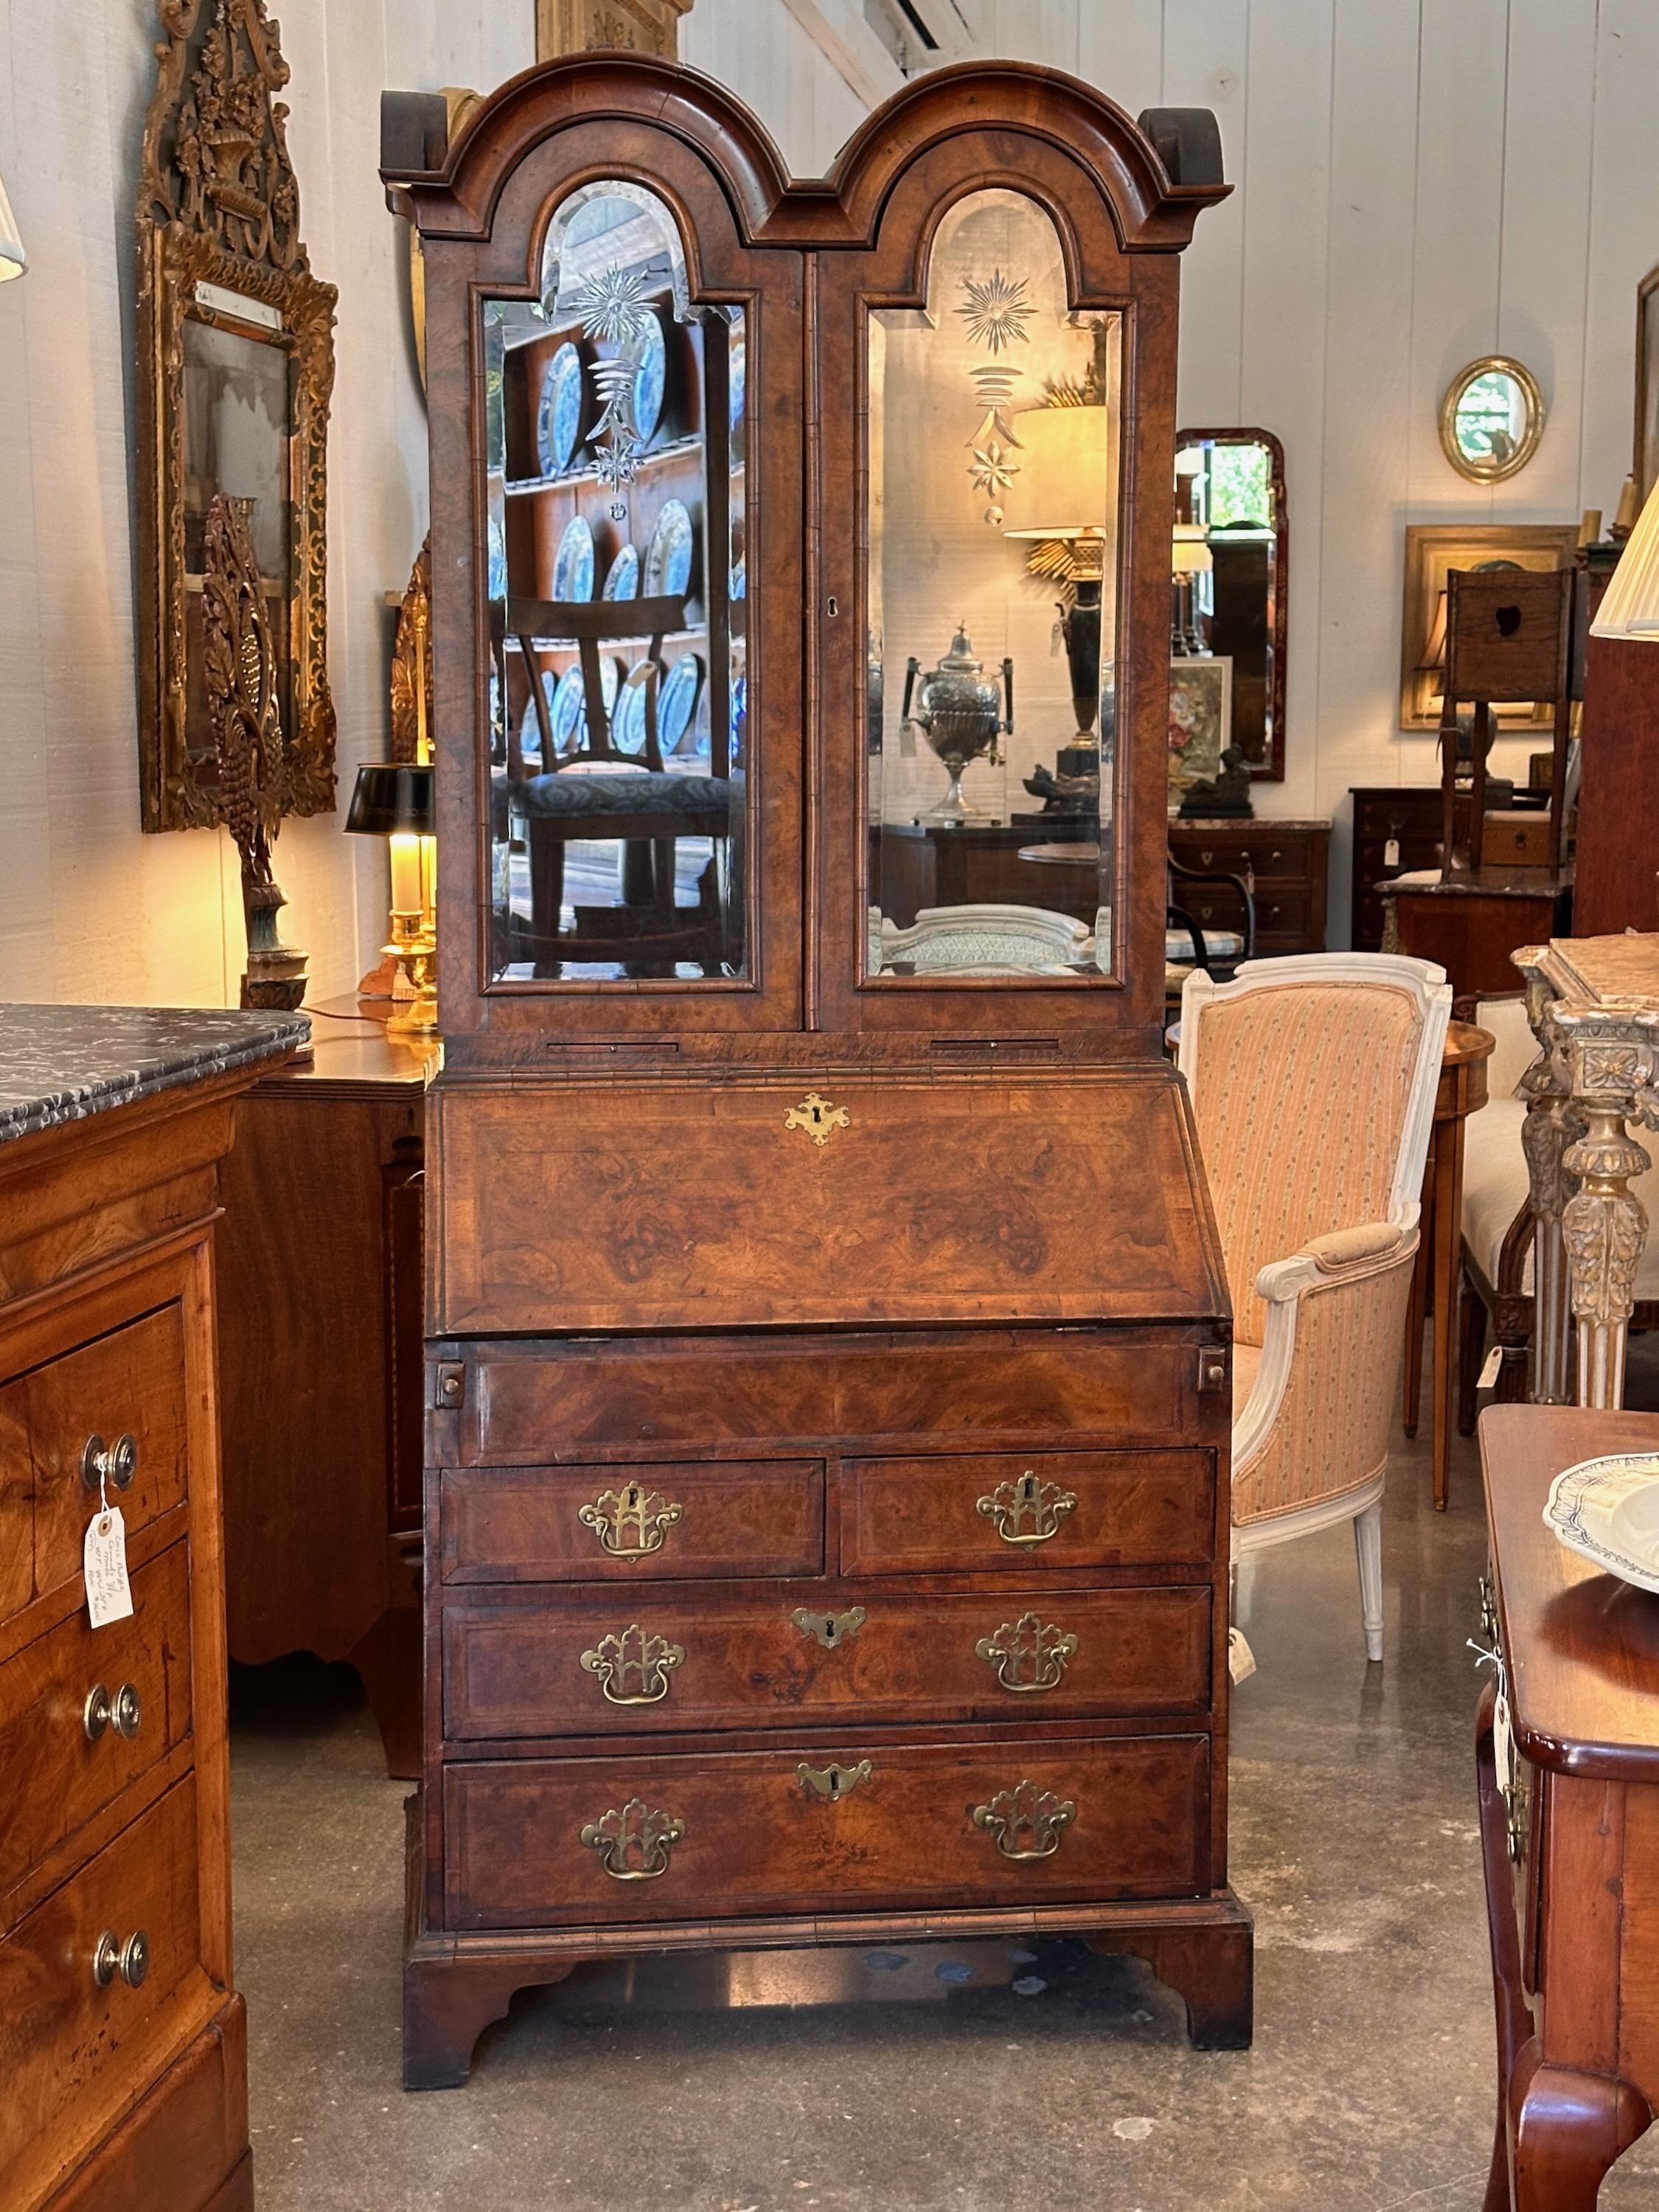 A petite size secretary with lots of style. Mirrored doors are beautiful.